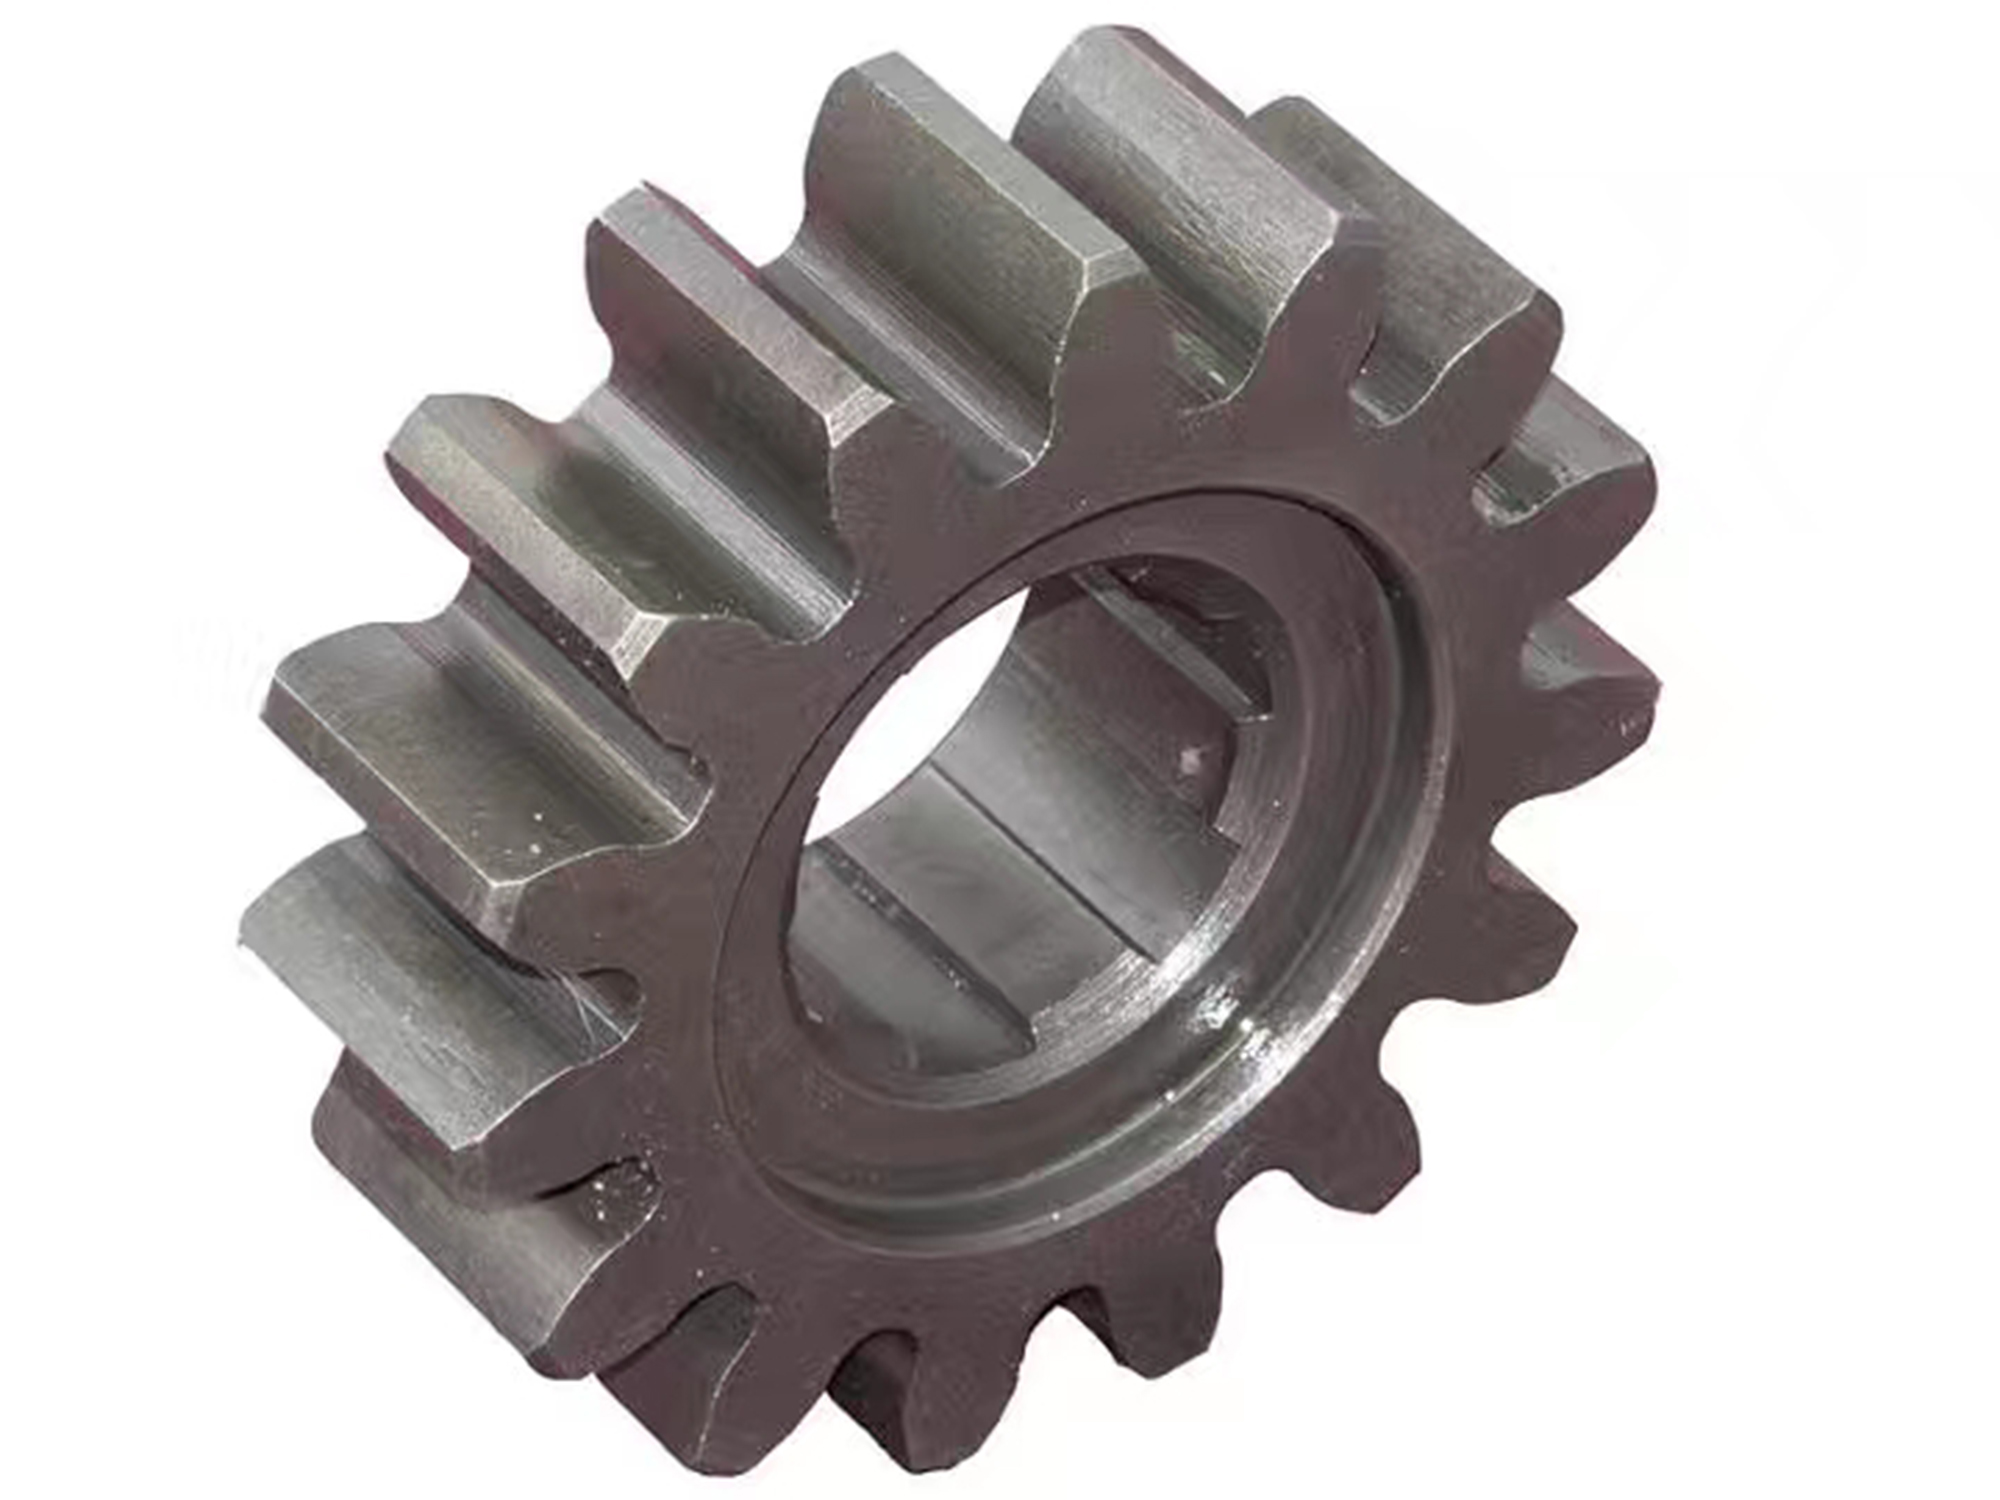 China Manufacturer for Bronze Casting Supplier - Gears    Quenched and tempered steel, quenched steel – Neuland Metals